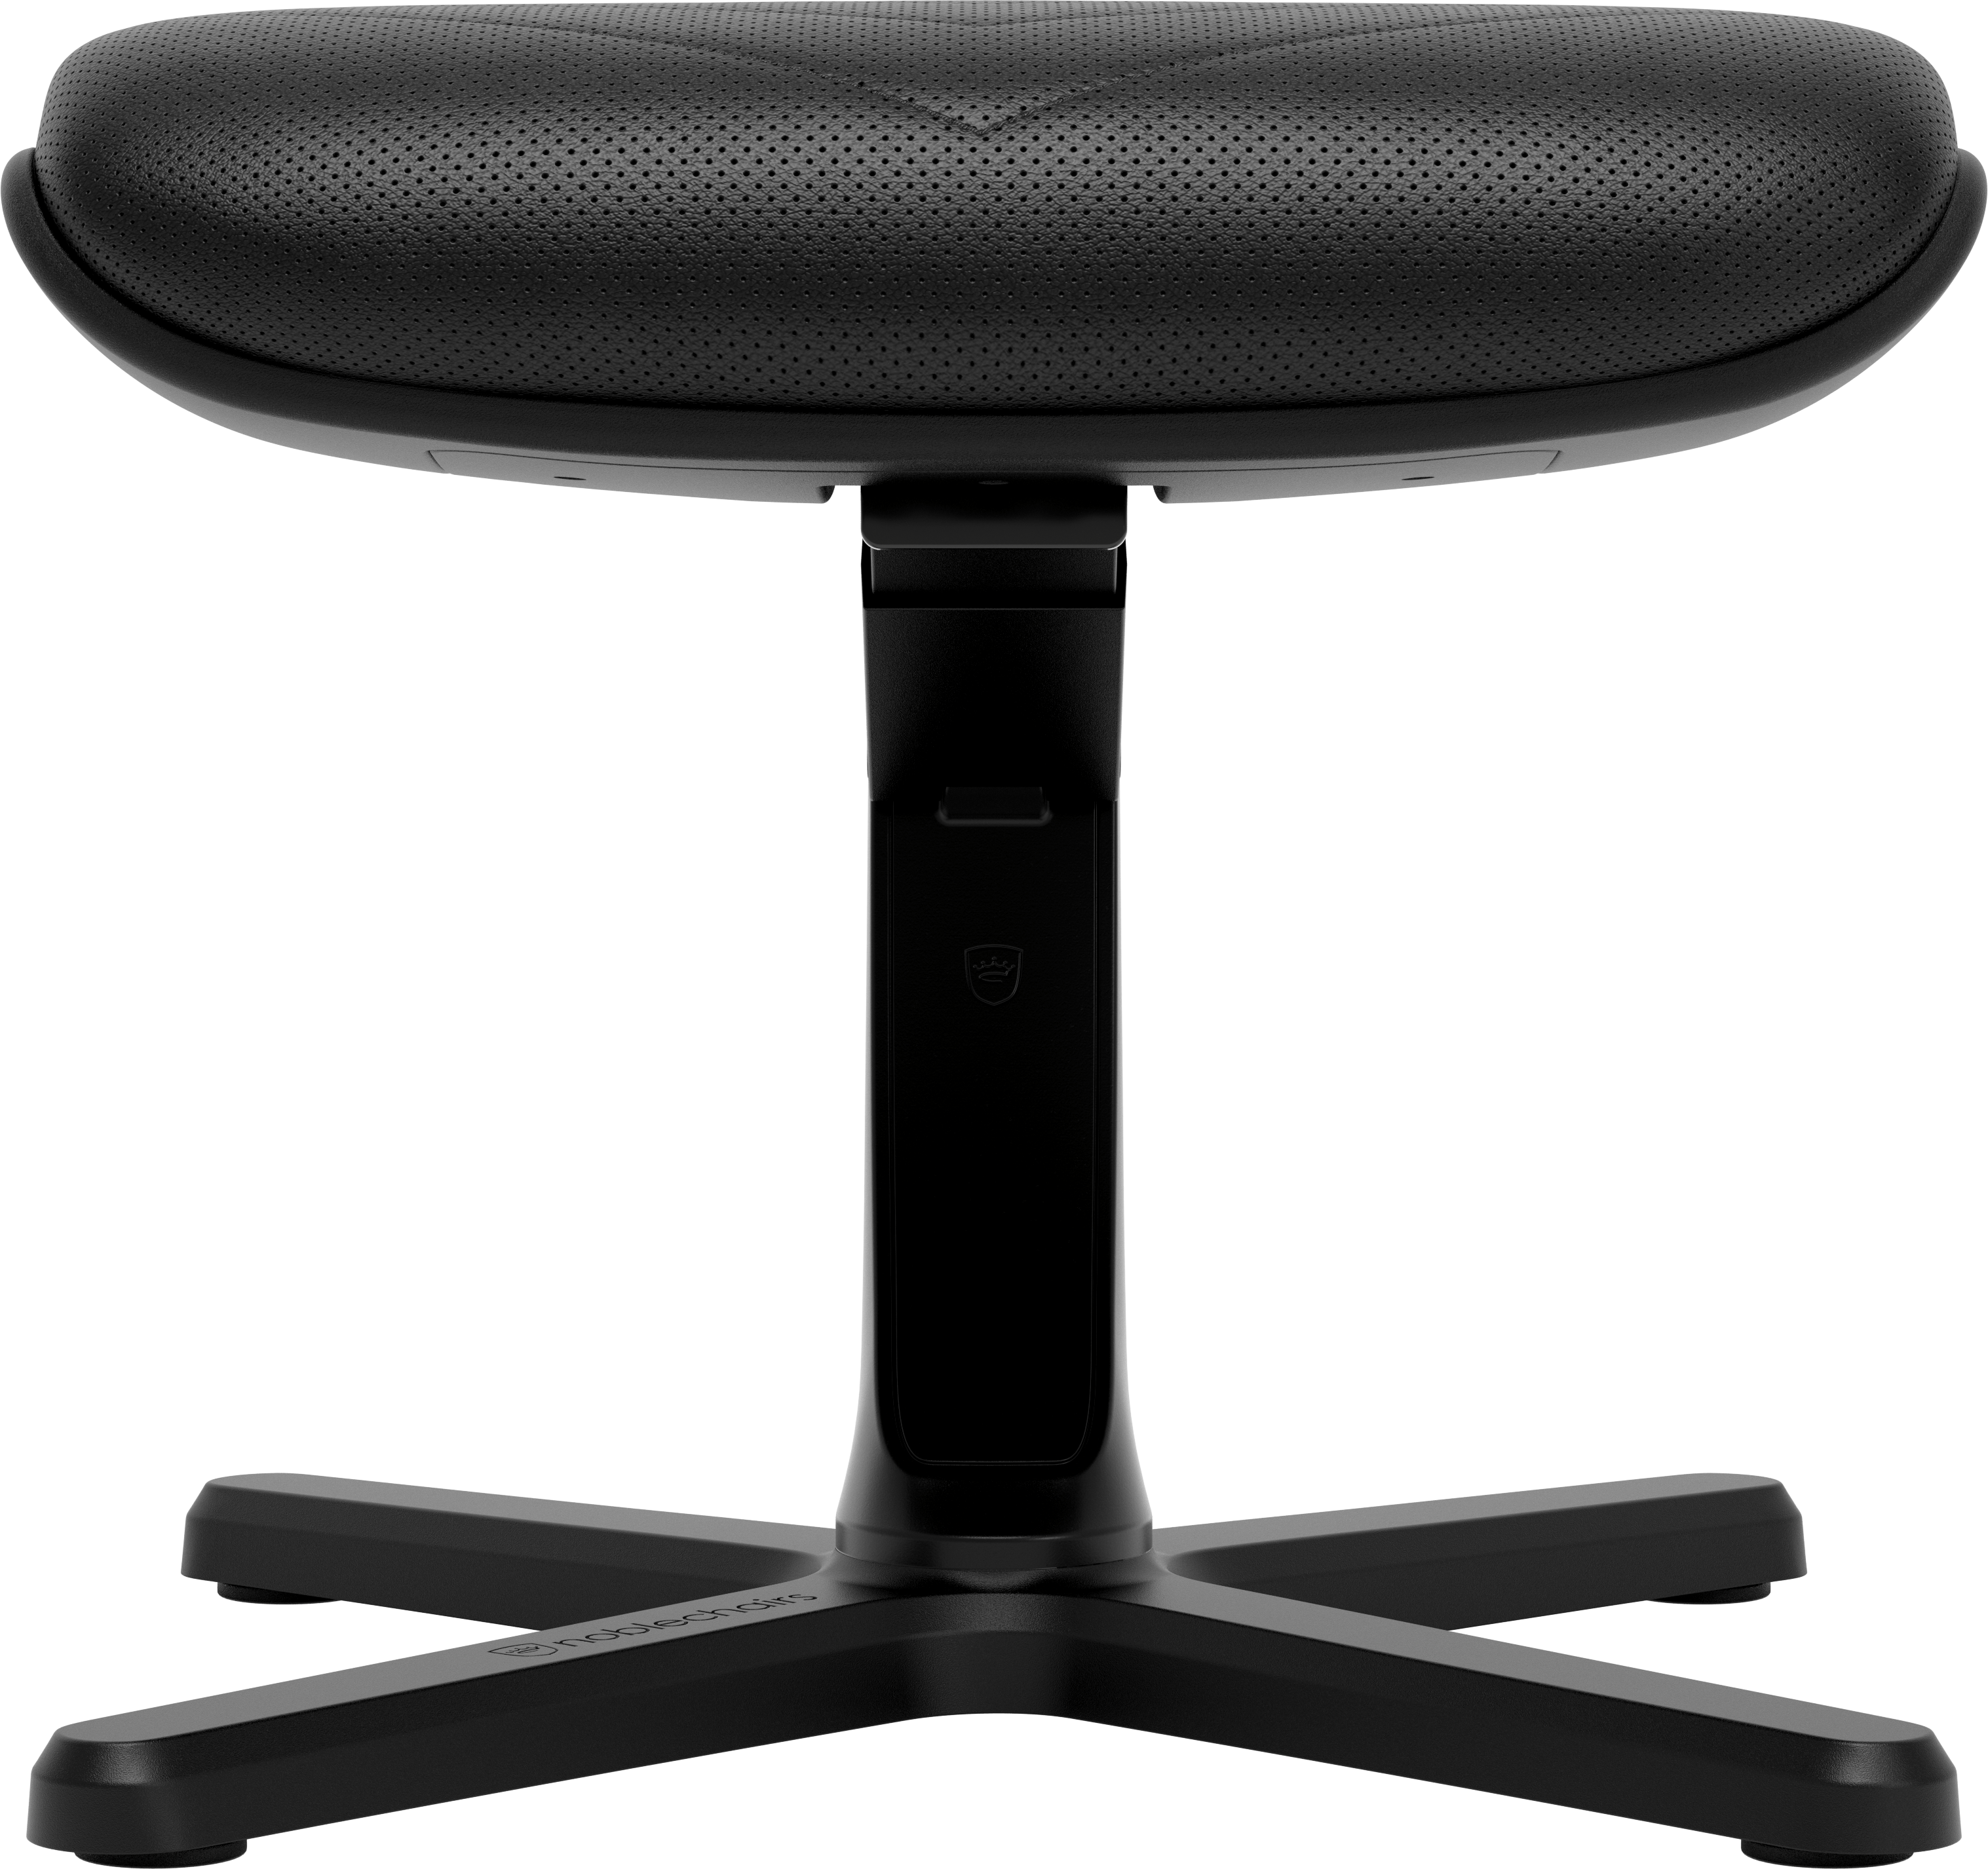 noblechairs Footrest 2 - Black awesome design